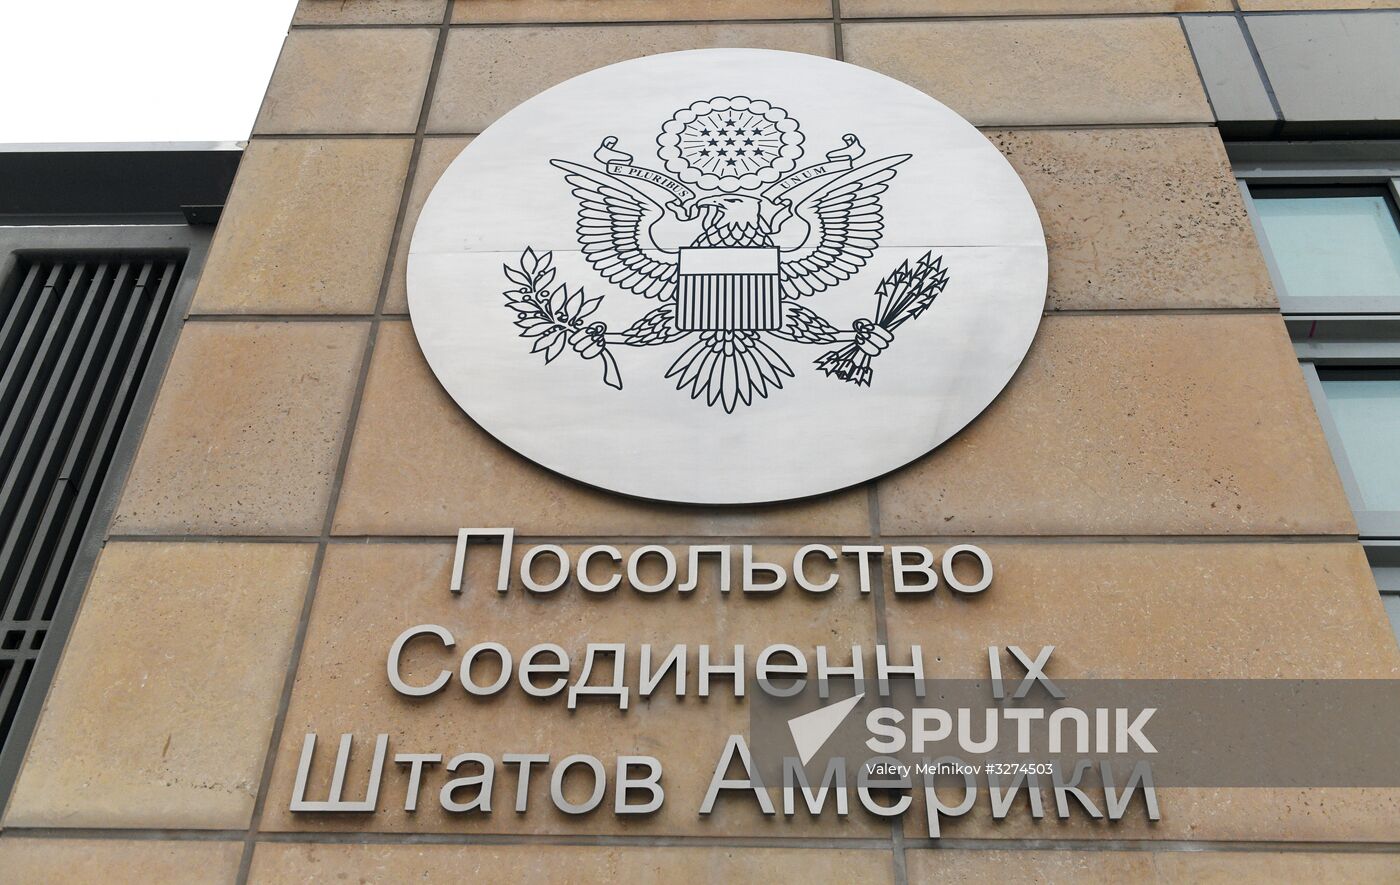 US Consulate in Moscow receives visitors inside new building